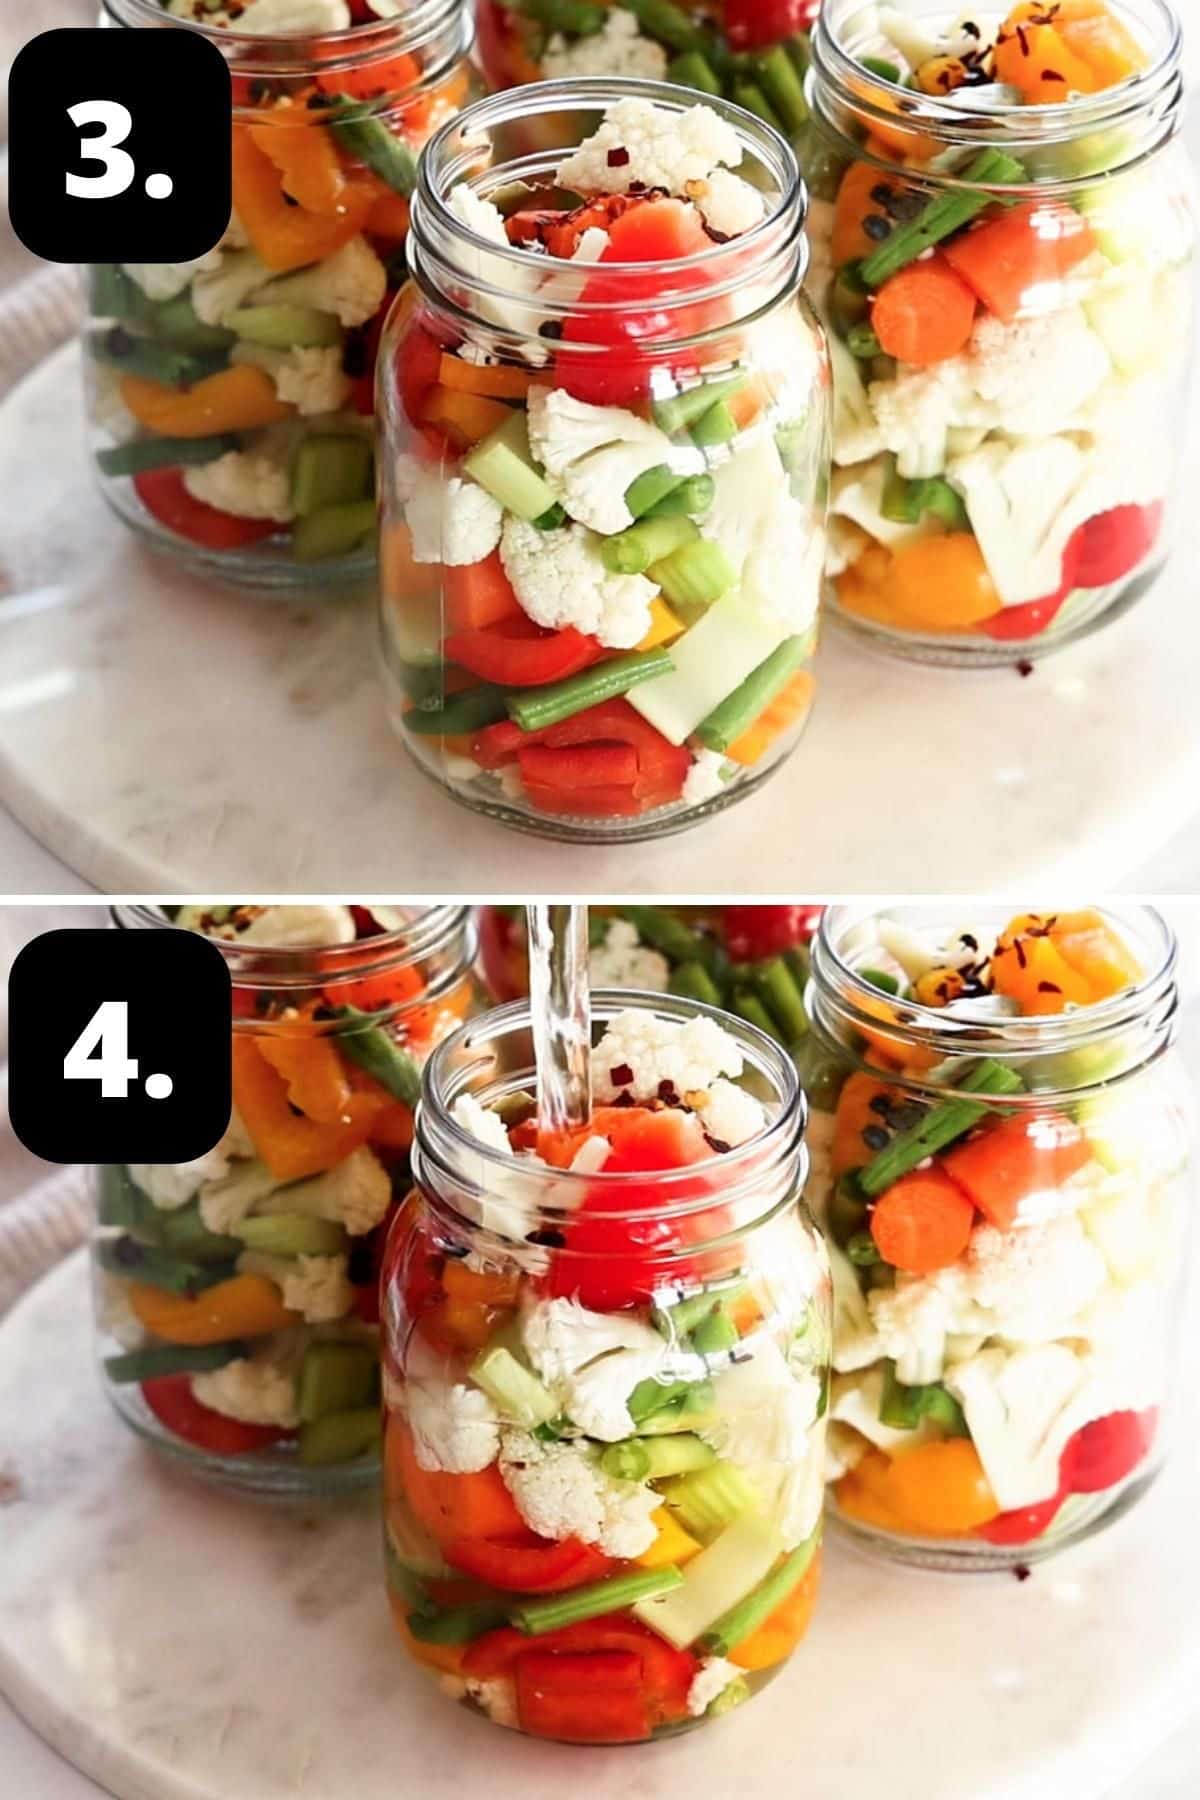 Steps 3-4 of preparing this recipe: jars filled with the vegetables and spices and topping the jars with the pickling brine.